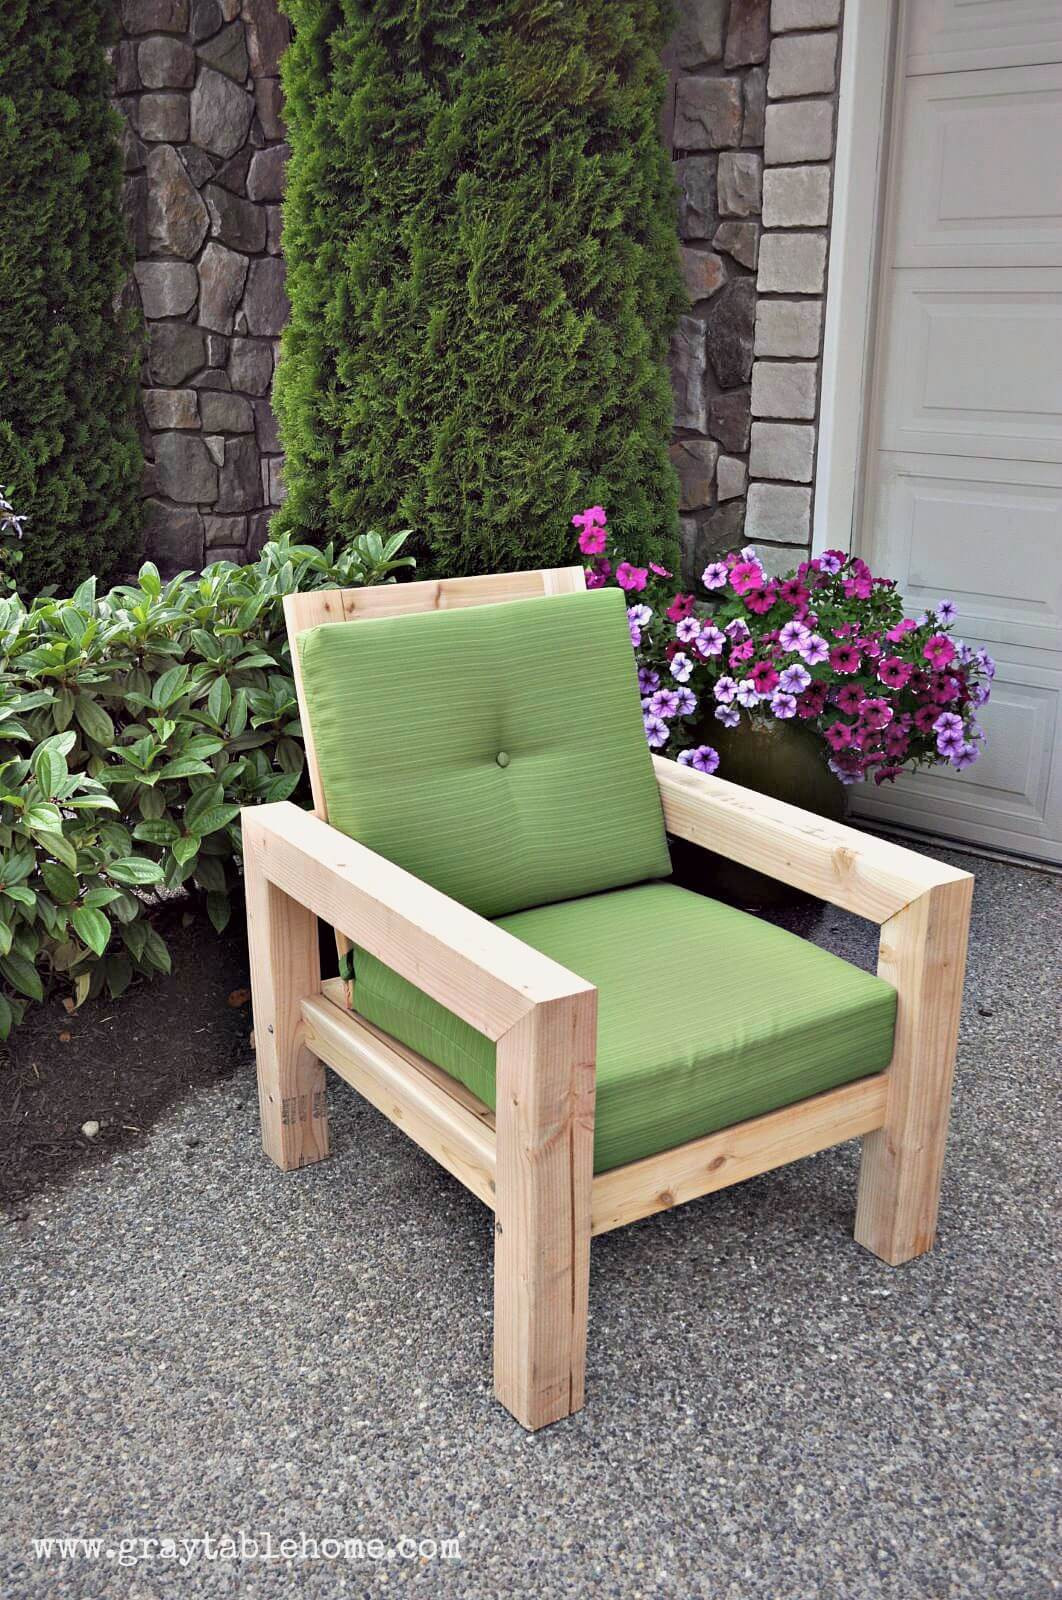 Outdoor Furniture Ideas DIY
 29 Best DIY Outdoor Furniture Projects Ideas and Designs